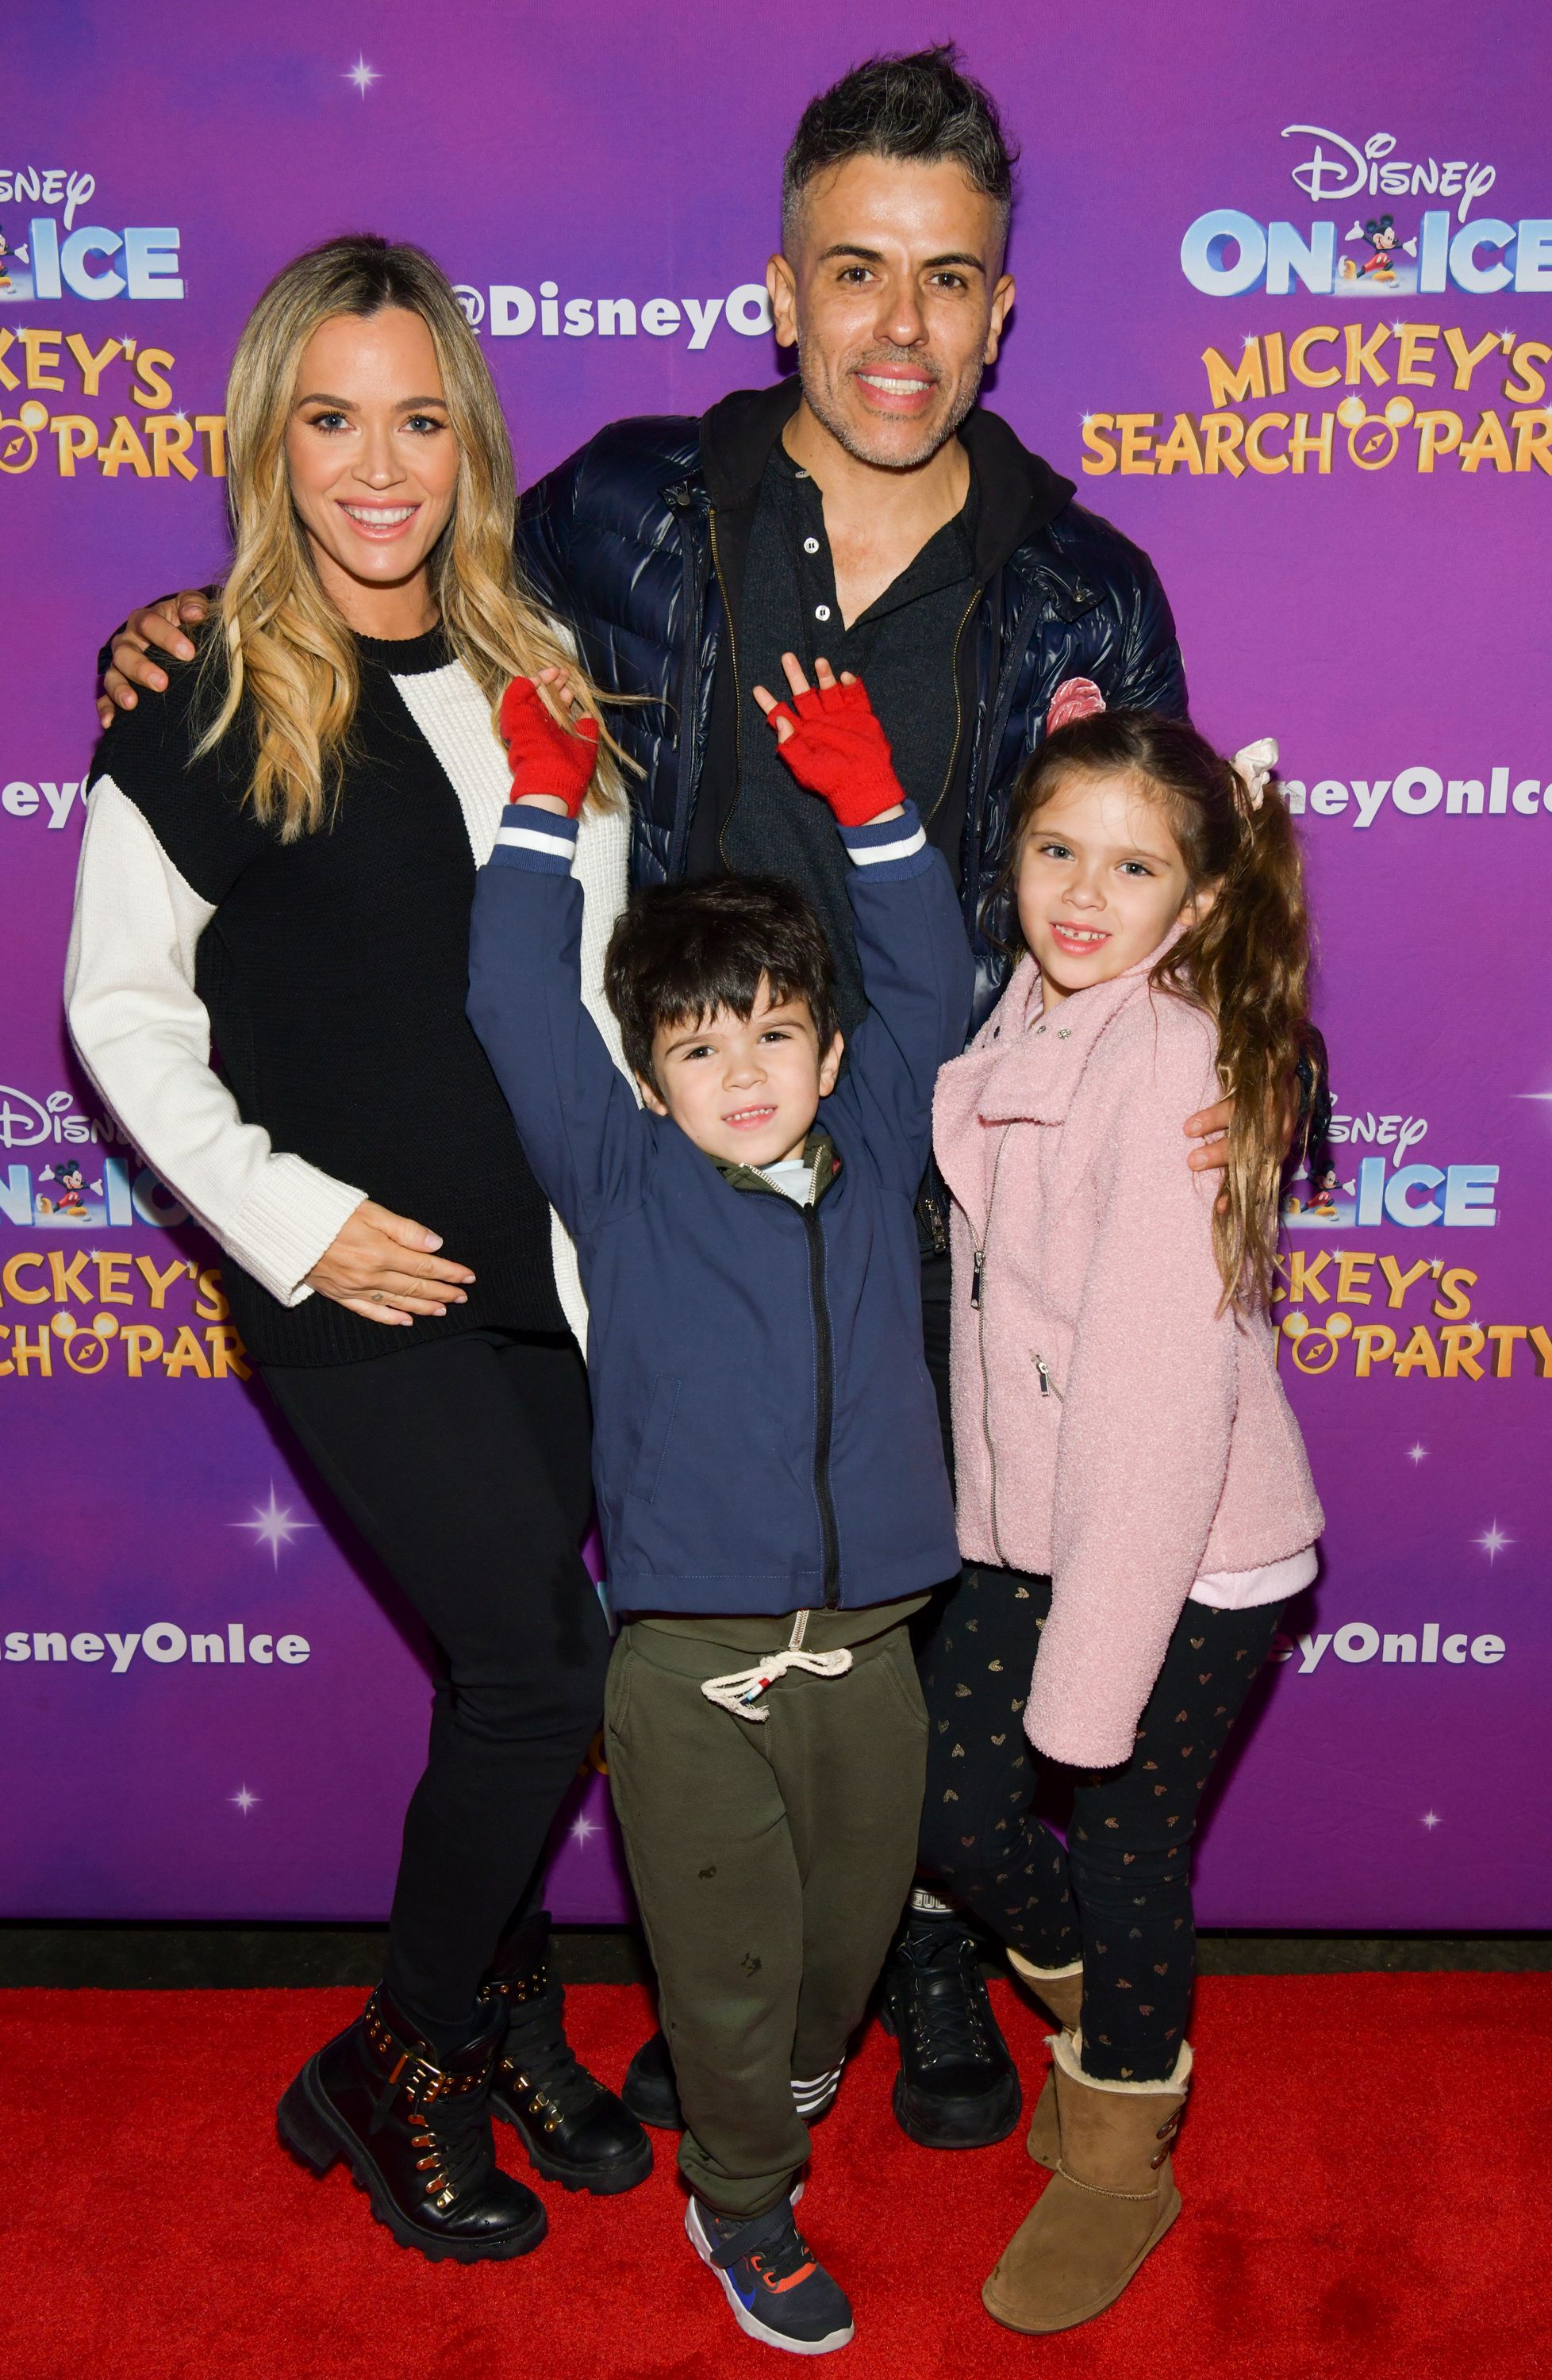 (L-R) Teddi Mellencamp, Cruz Arroyave, Edwin Arroyave, and Slate Arroyave during the 2019 Disney On Ice "Mickey's Search Party" at Staples Center on December 13, 2019 in Los Angeles, California. | Source: Getty Images